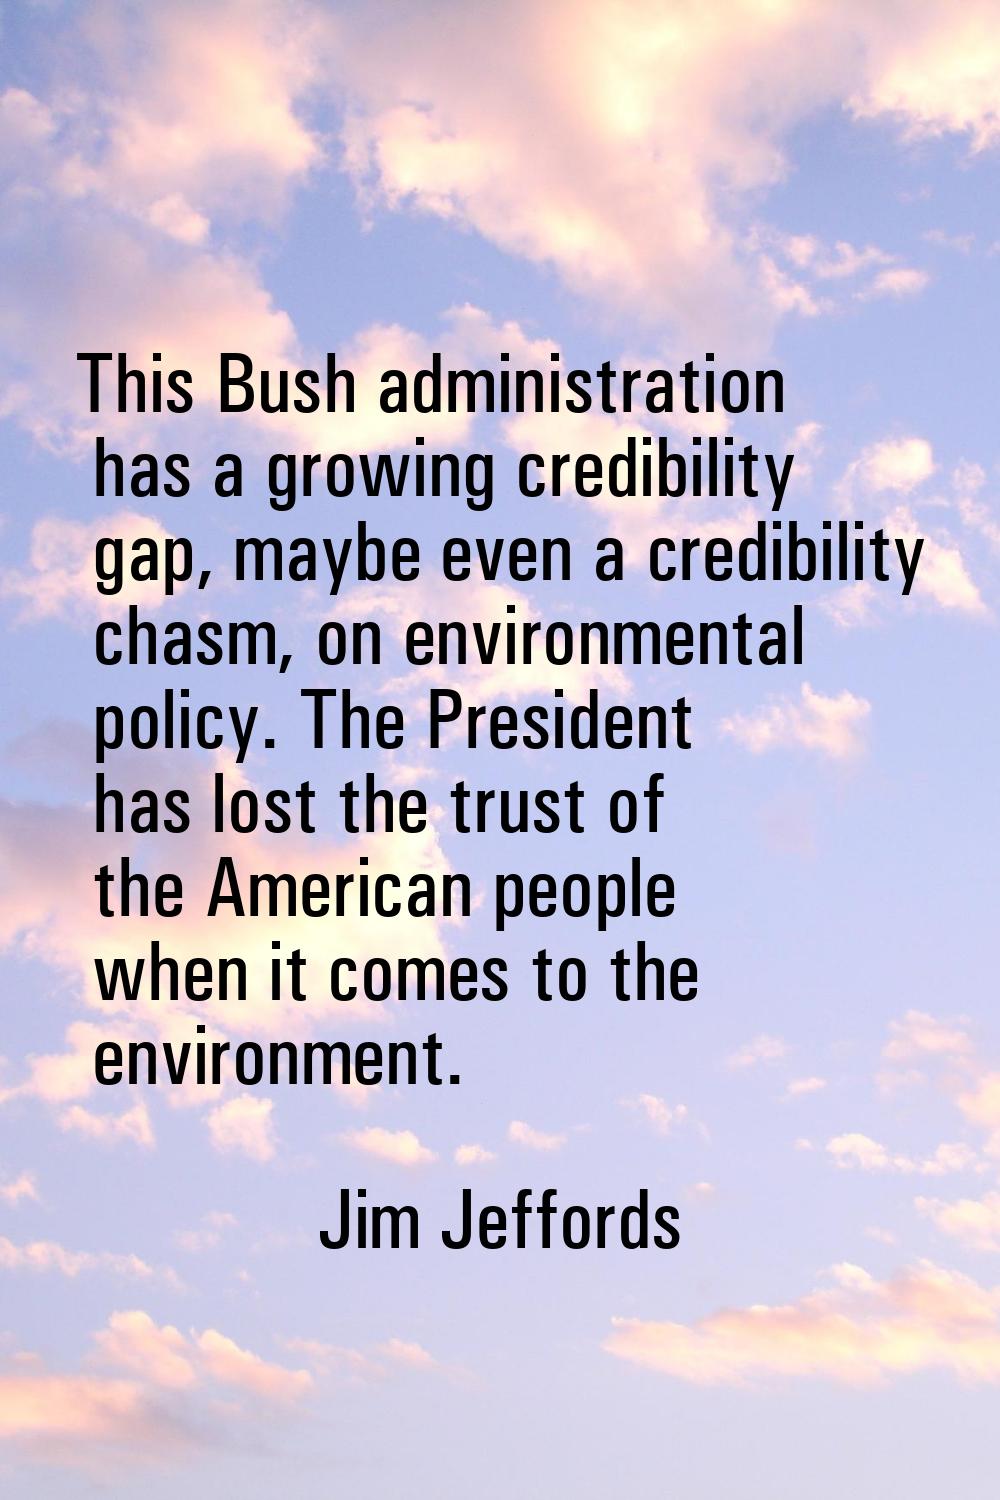 This Bush administration has a growing credibility gap, maybe even a credibility chasm, on environm